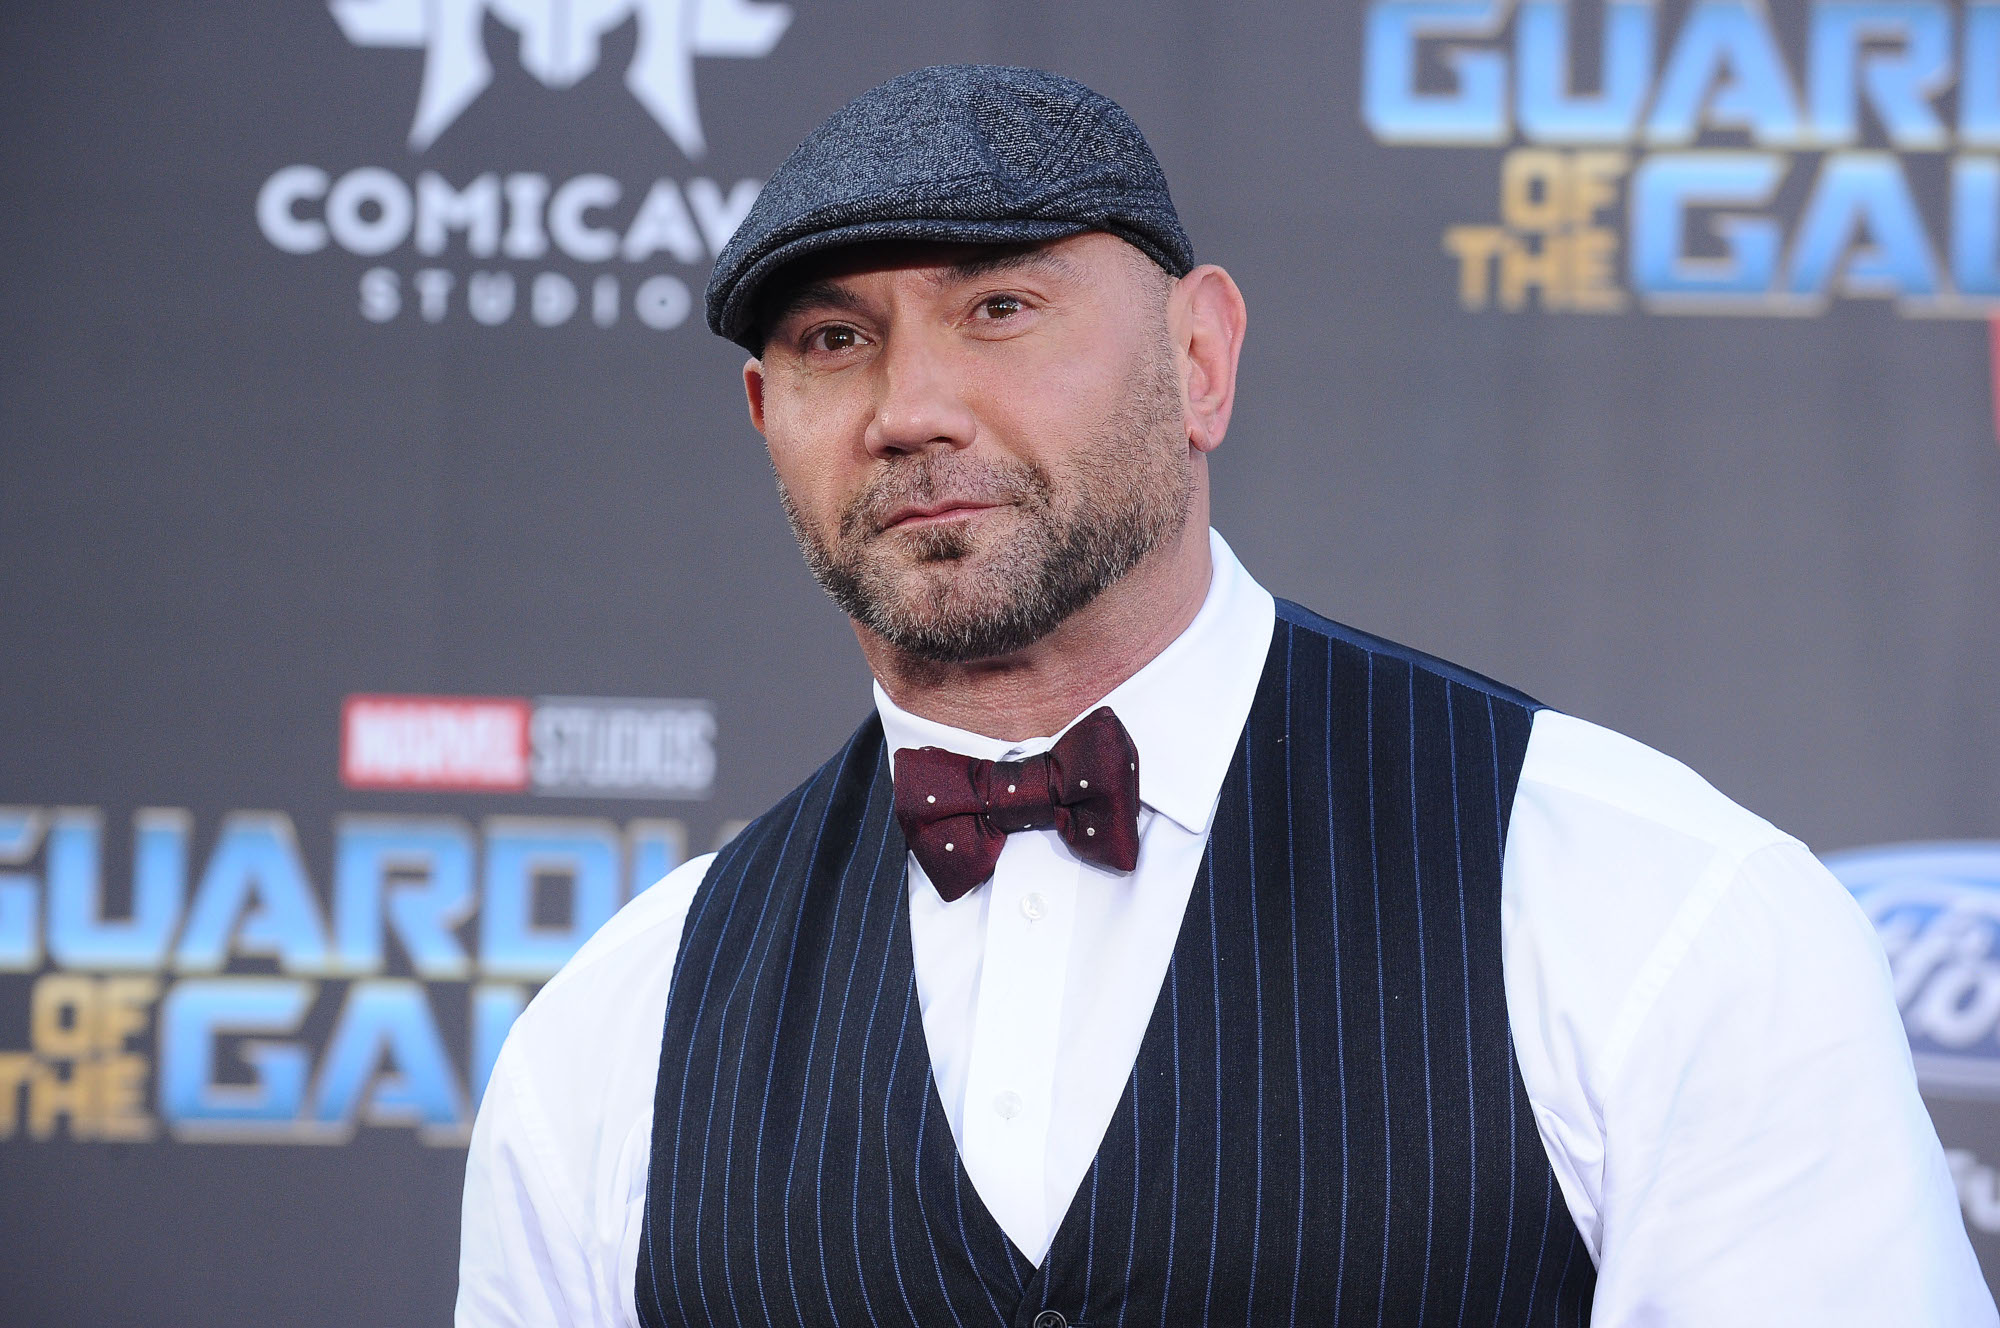 Marvel star Dave Bautista does not reprise his role in 'What If...?' In this photo, he's wearing an ivy cap, black striped vest, white shirt, and bowtie. He's looking past the camera and there's a 'Guardians of the Galaxy' wall behind him.